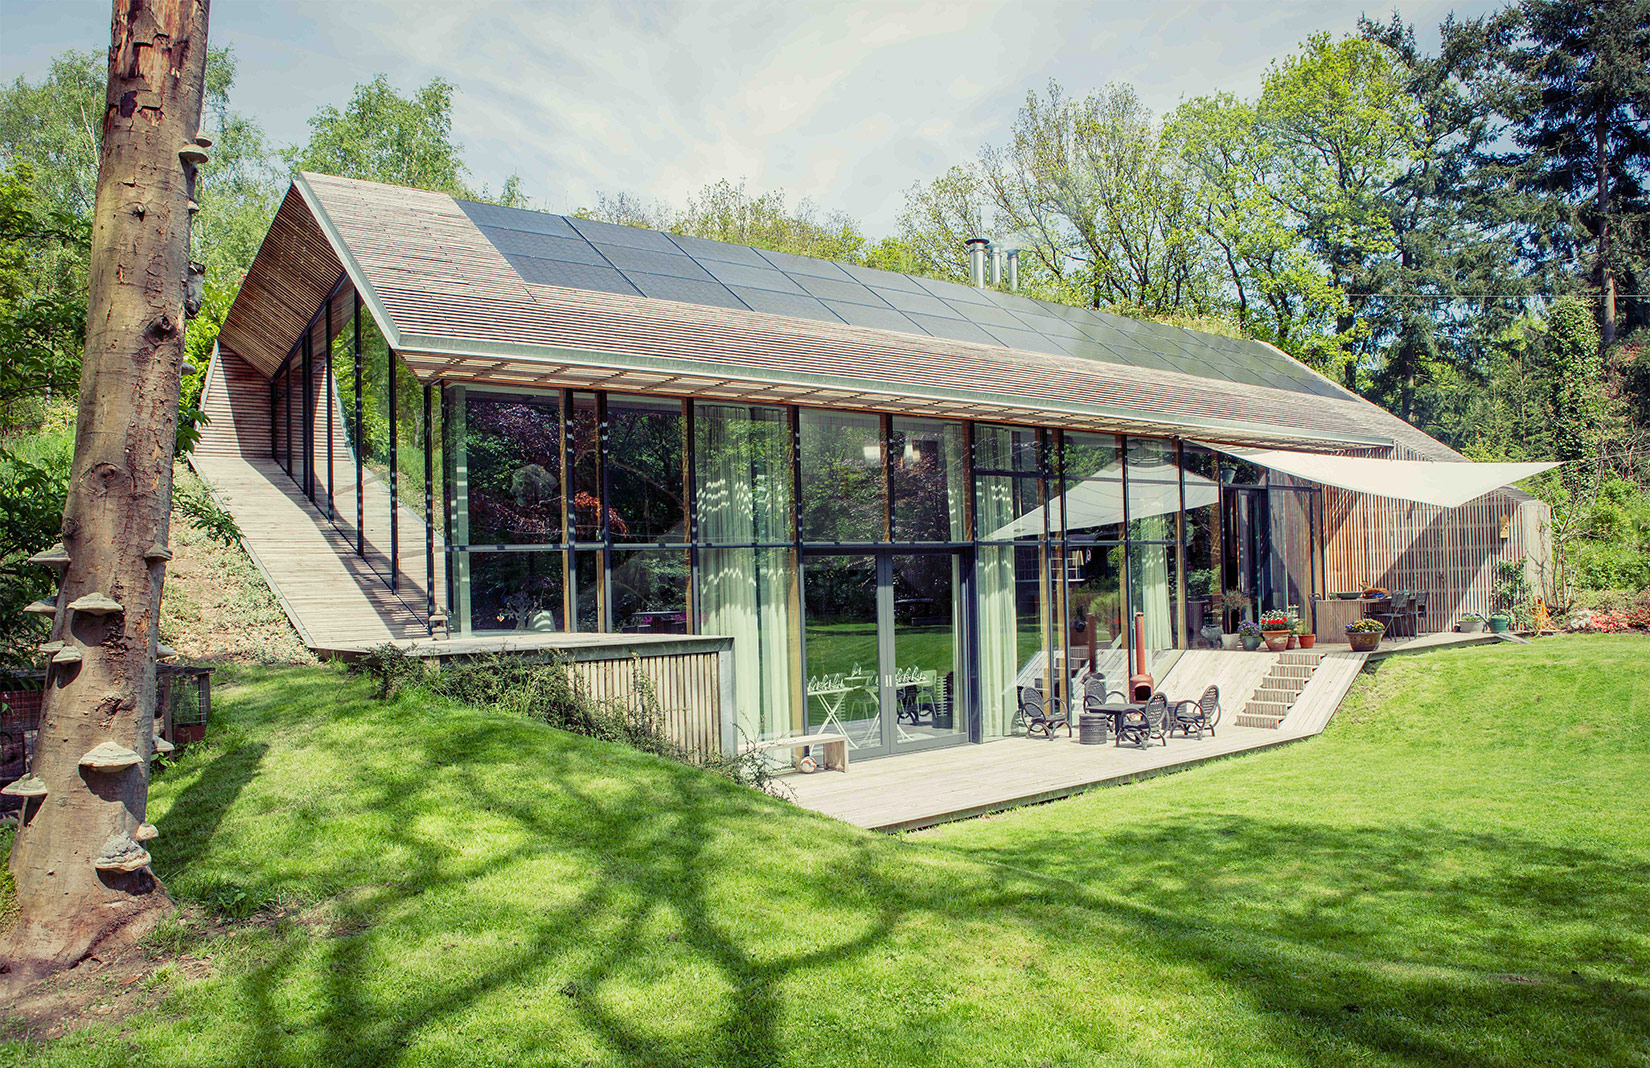 Property of the week: a Dutch eco-home built into the earth